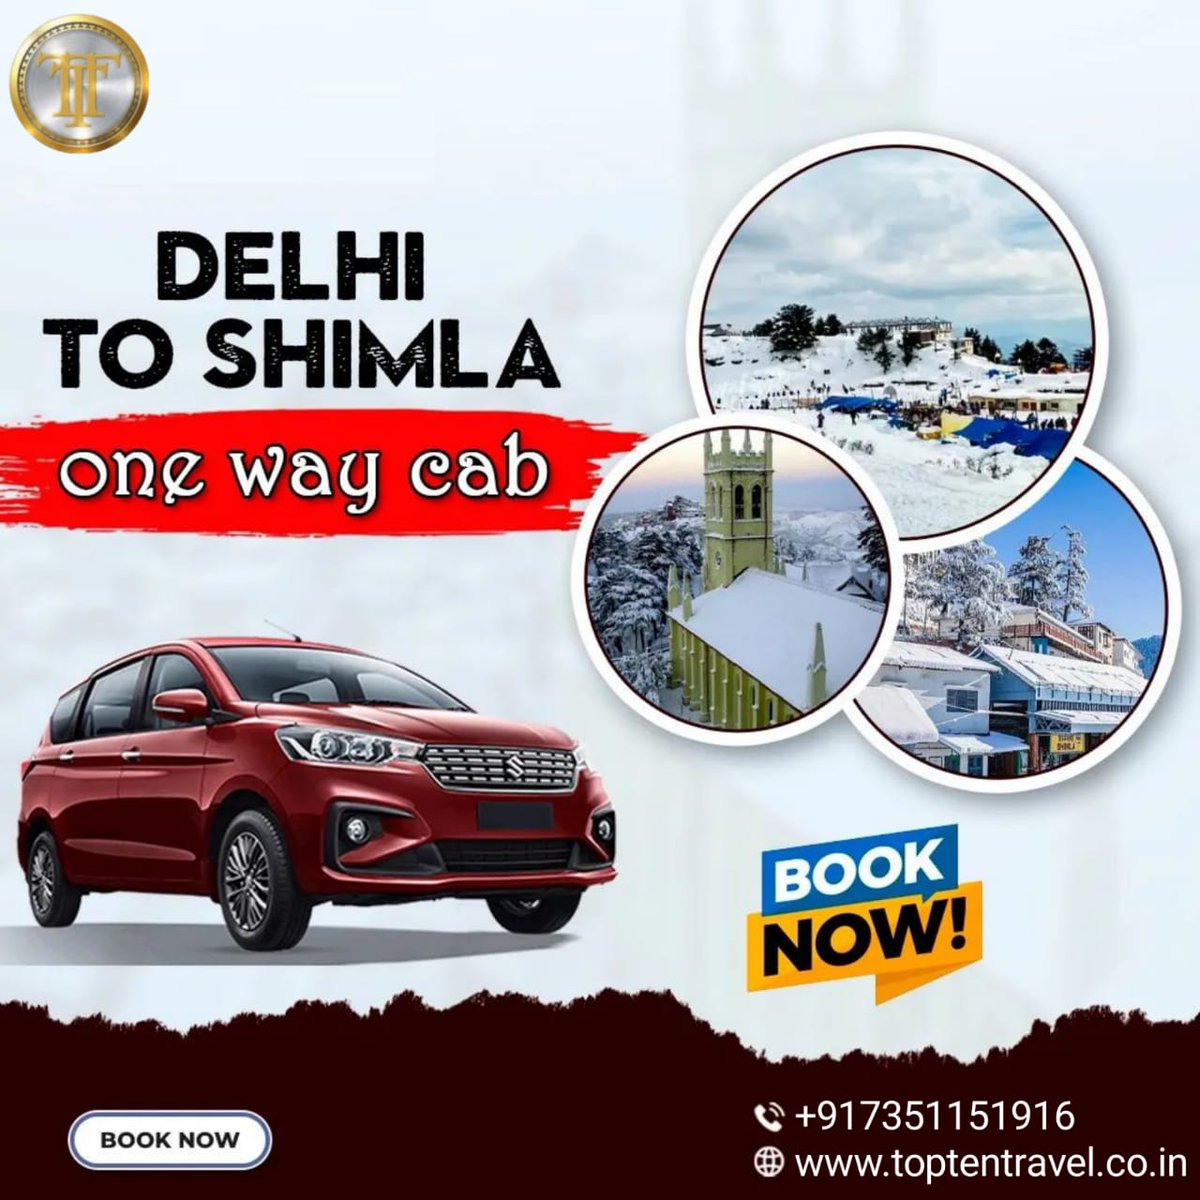 Hire a car for your trip from Delhi to Shimla and explore the scenic beauty hassle-free.
☎️ - 👉+917351151916
🌐 -www.toptentravel.co.in
#cabrentaldelhi #tempotraveller #touristbuslovers #booknowtravellater #booknow #booknow‼️ #cabbooking #tripwithfamily #tripwithlocals